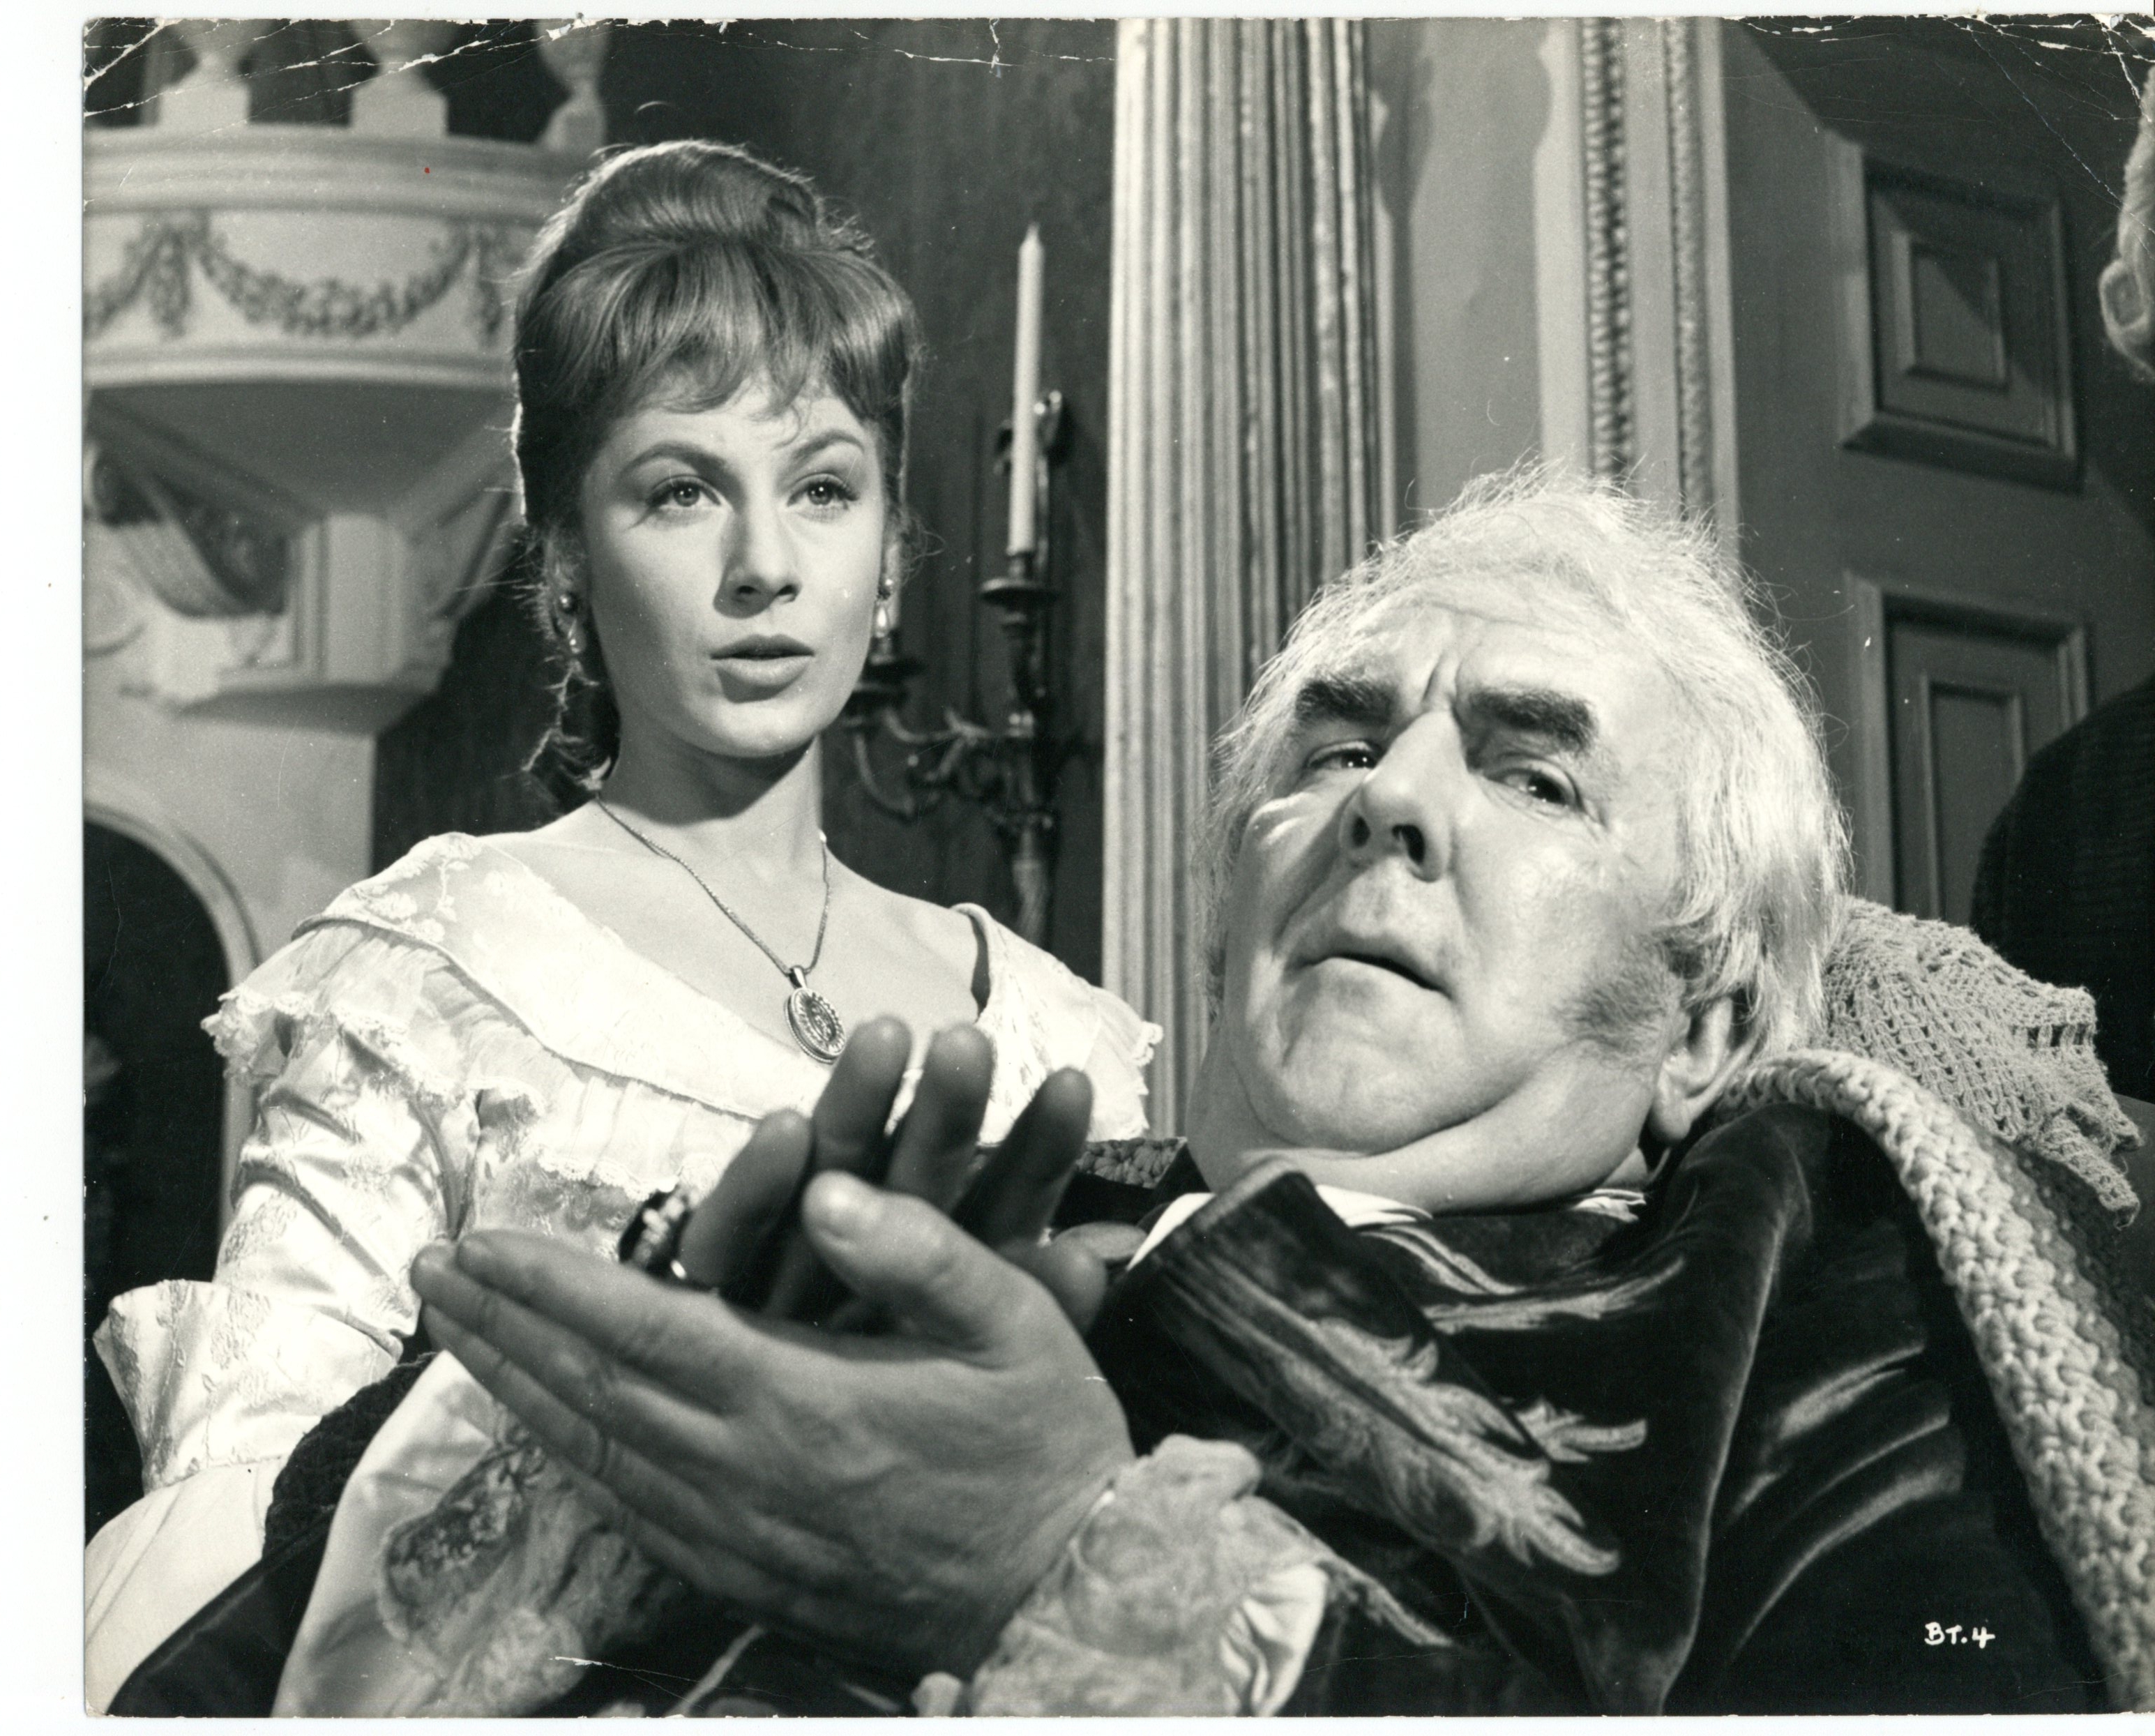 Ann Lynn and Joseph Tomelty in The Black Torment (1964)